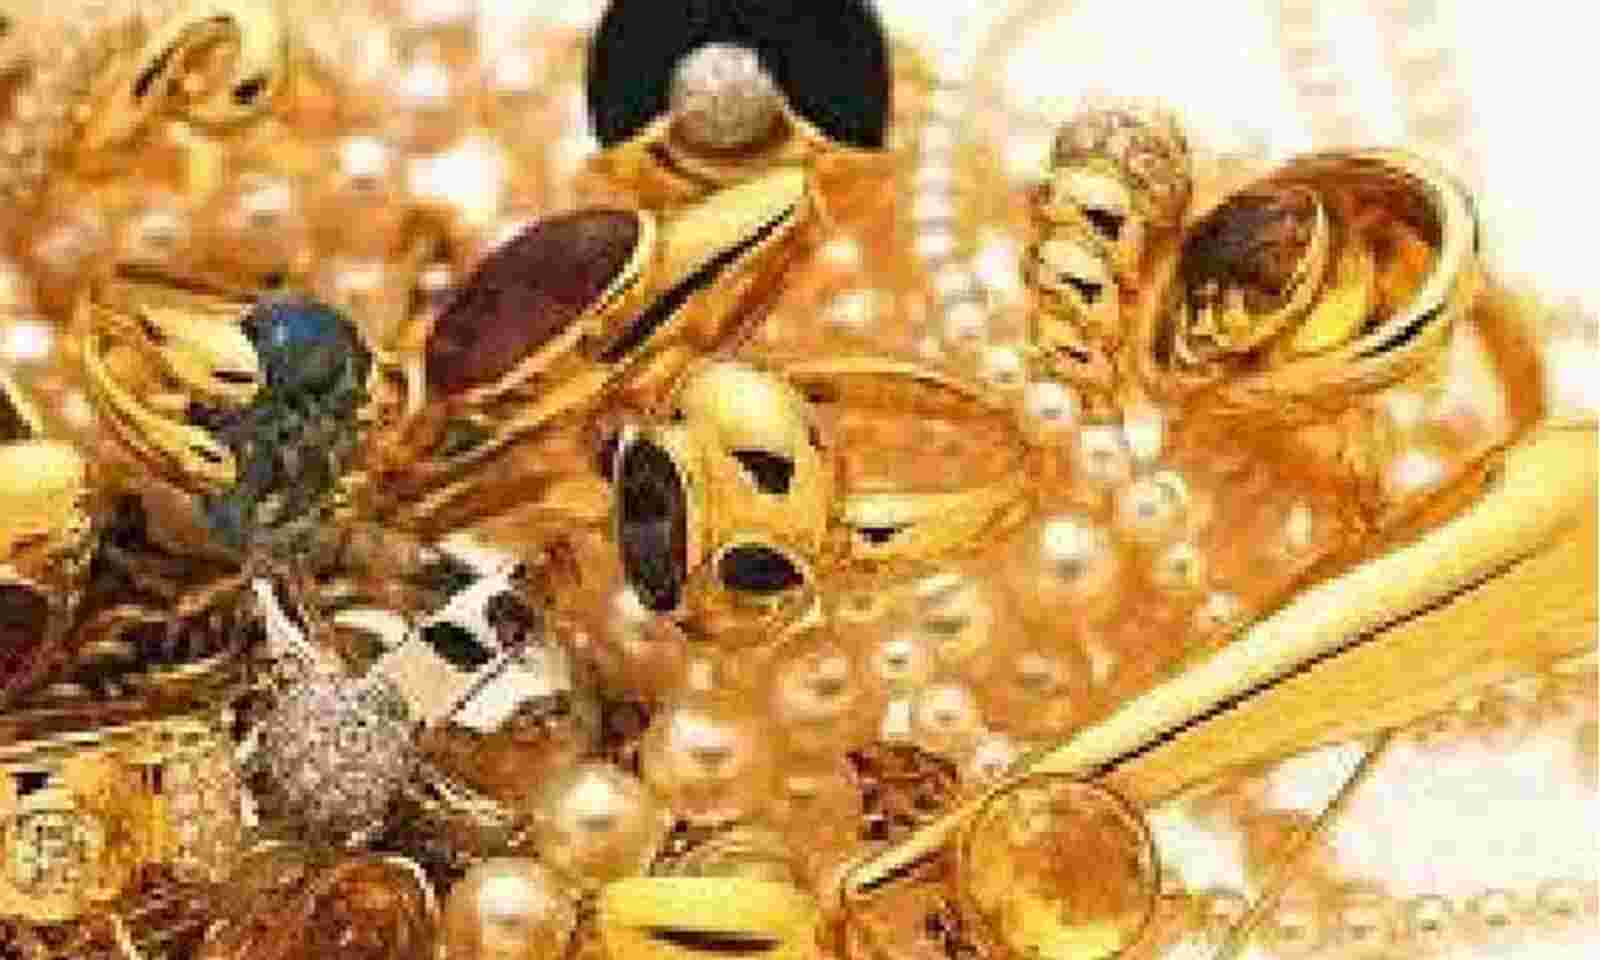 Gold and Diamond jewellery worth Rs. 1 crore stolen from a shop in Banjara  Hills